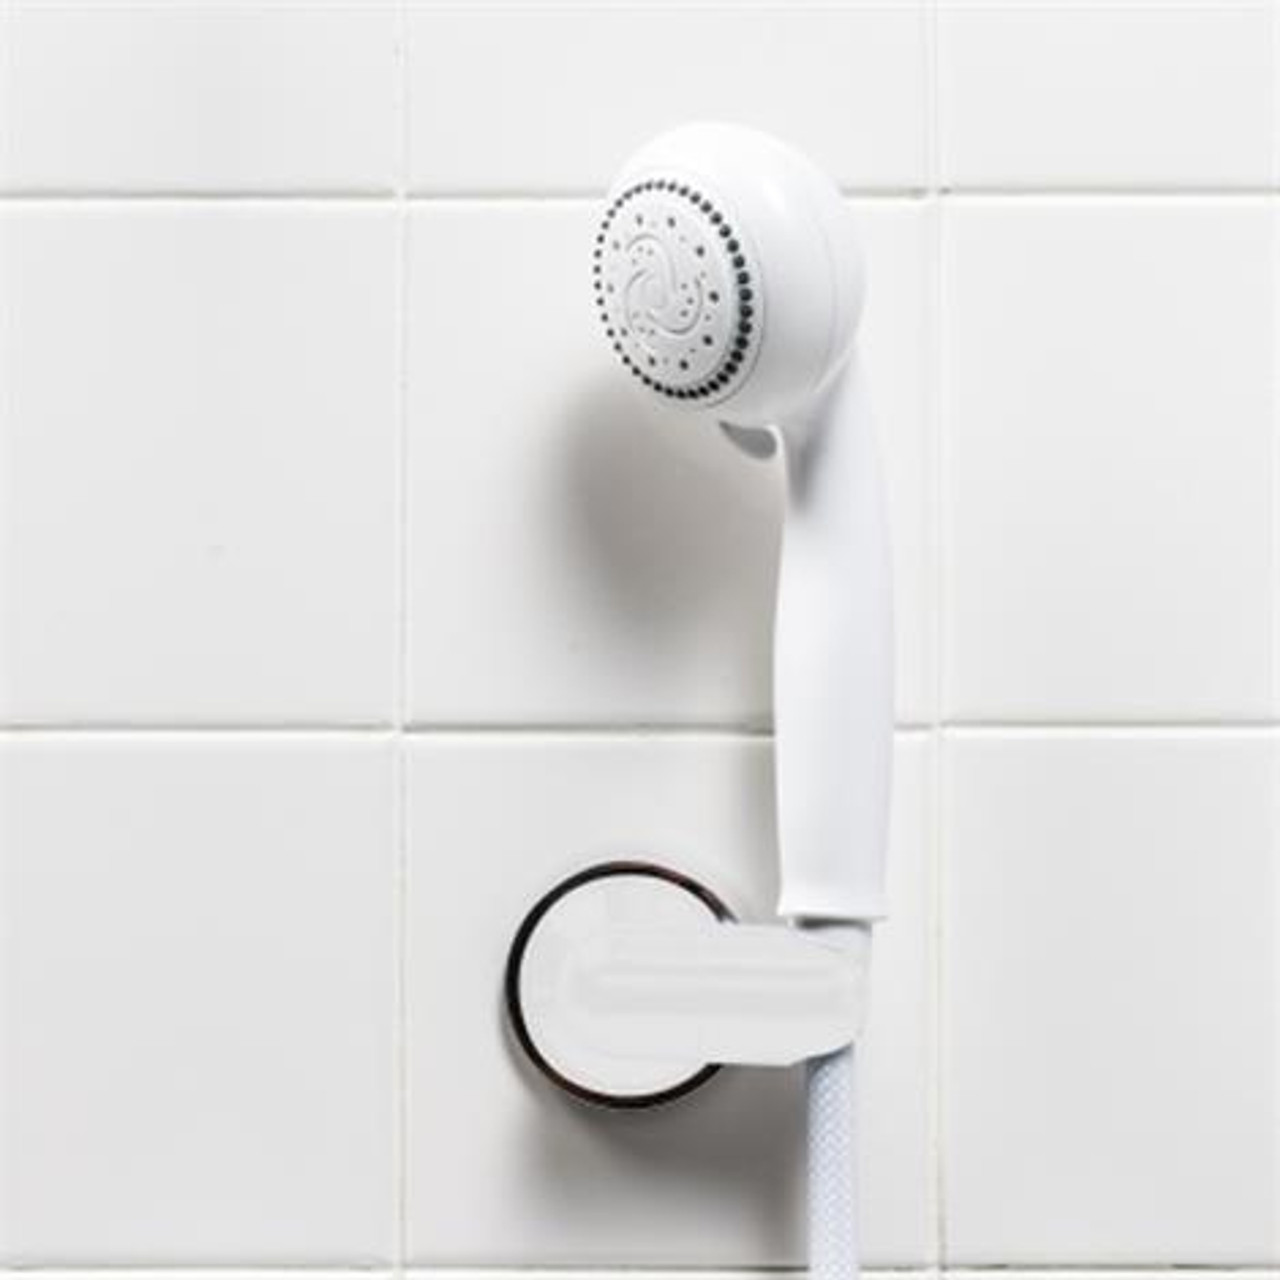 https://store.cevimed.com/images/stencil/1280x1280/products/132614/136505/25112019315Graham-Field-Universal-Hand-Held-Shower-Head-Holder-P__47496__38028.1633723025.jpg?c=1